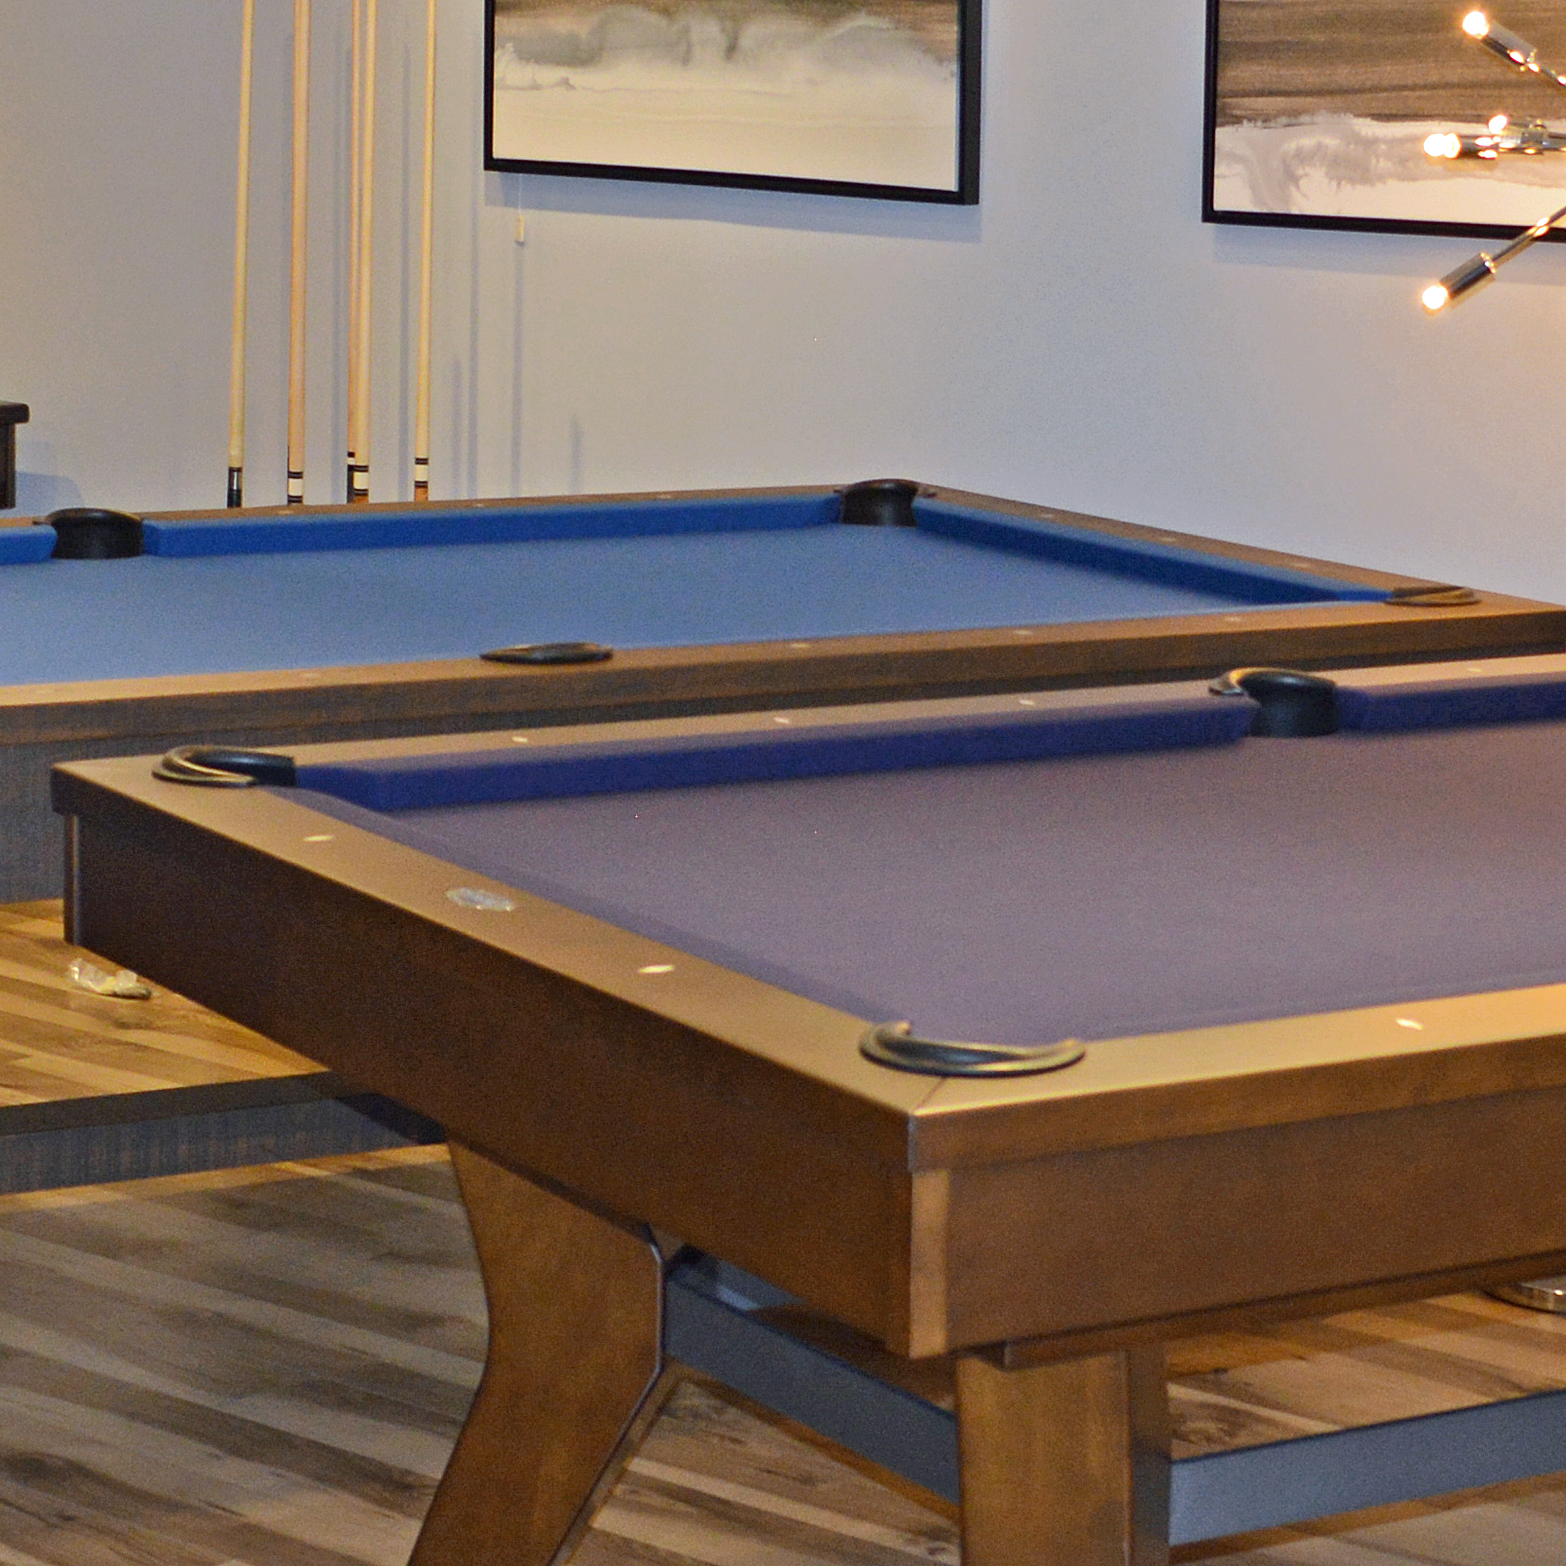 Used Bar Pool Table For Sale Near Me